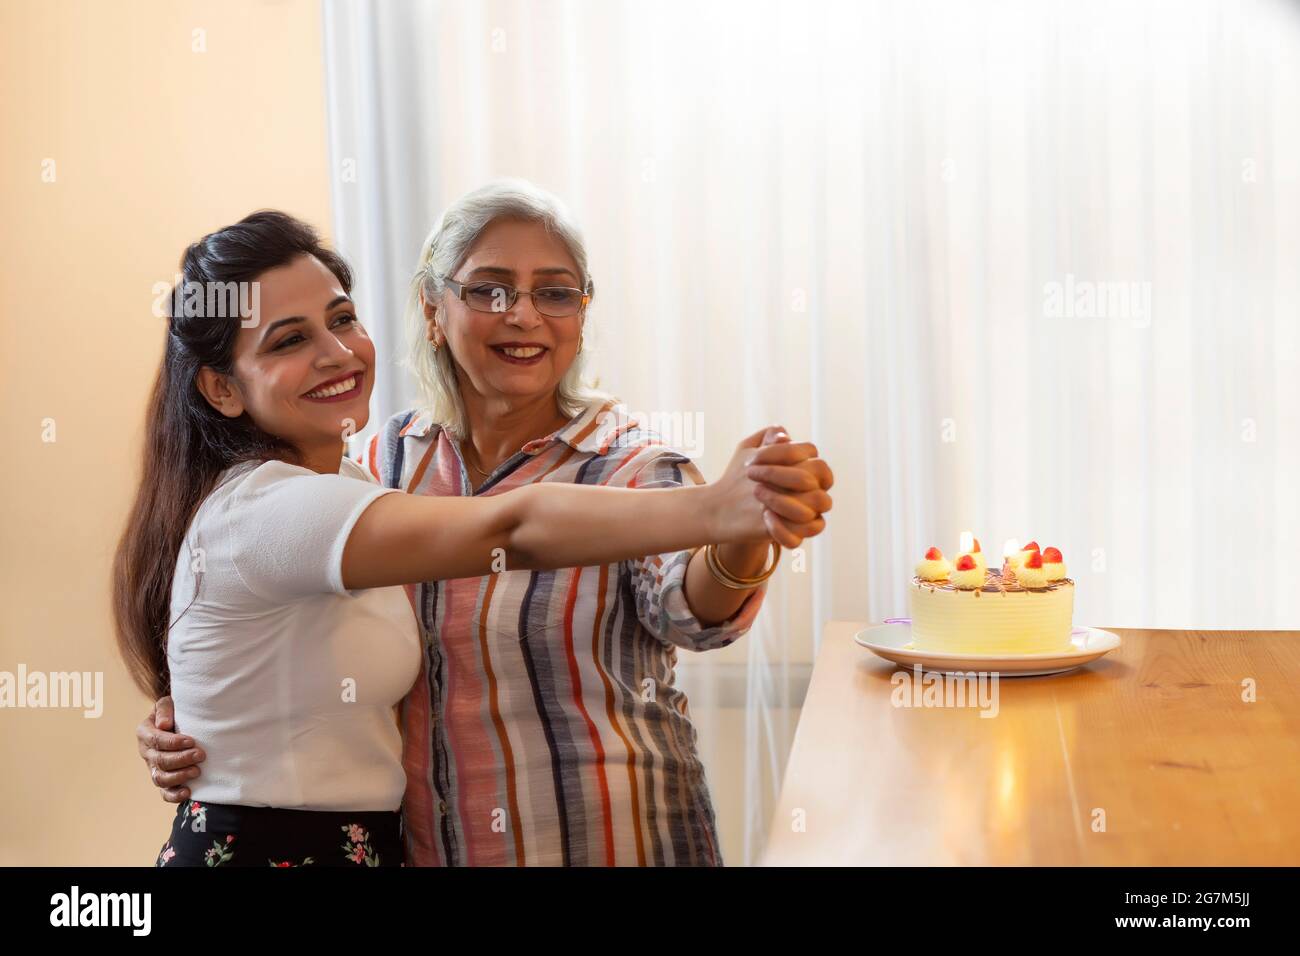 A DAUGHTER AND MOTHER ENJOYING AND DANCING TOGETHER WHILE CELEBRATING BIRTHDAY Stock Photo